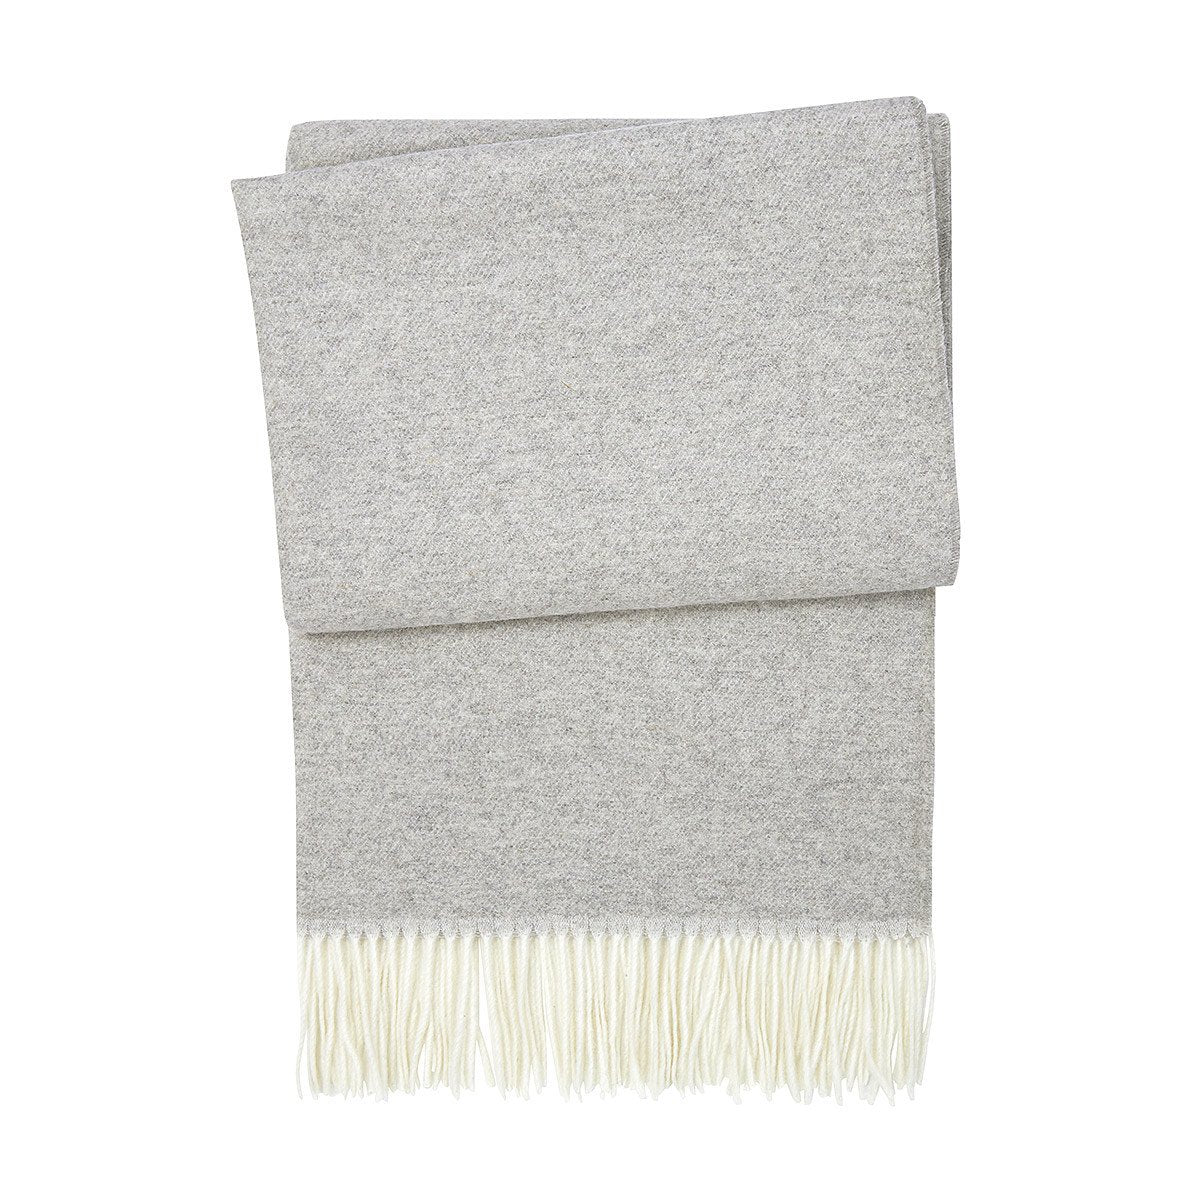 Agora Galet Light Gray Cashmere Throw by Yves Delorme | Fig Linens 